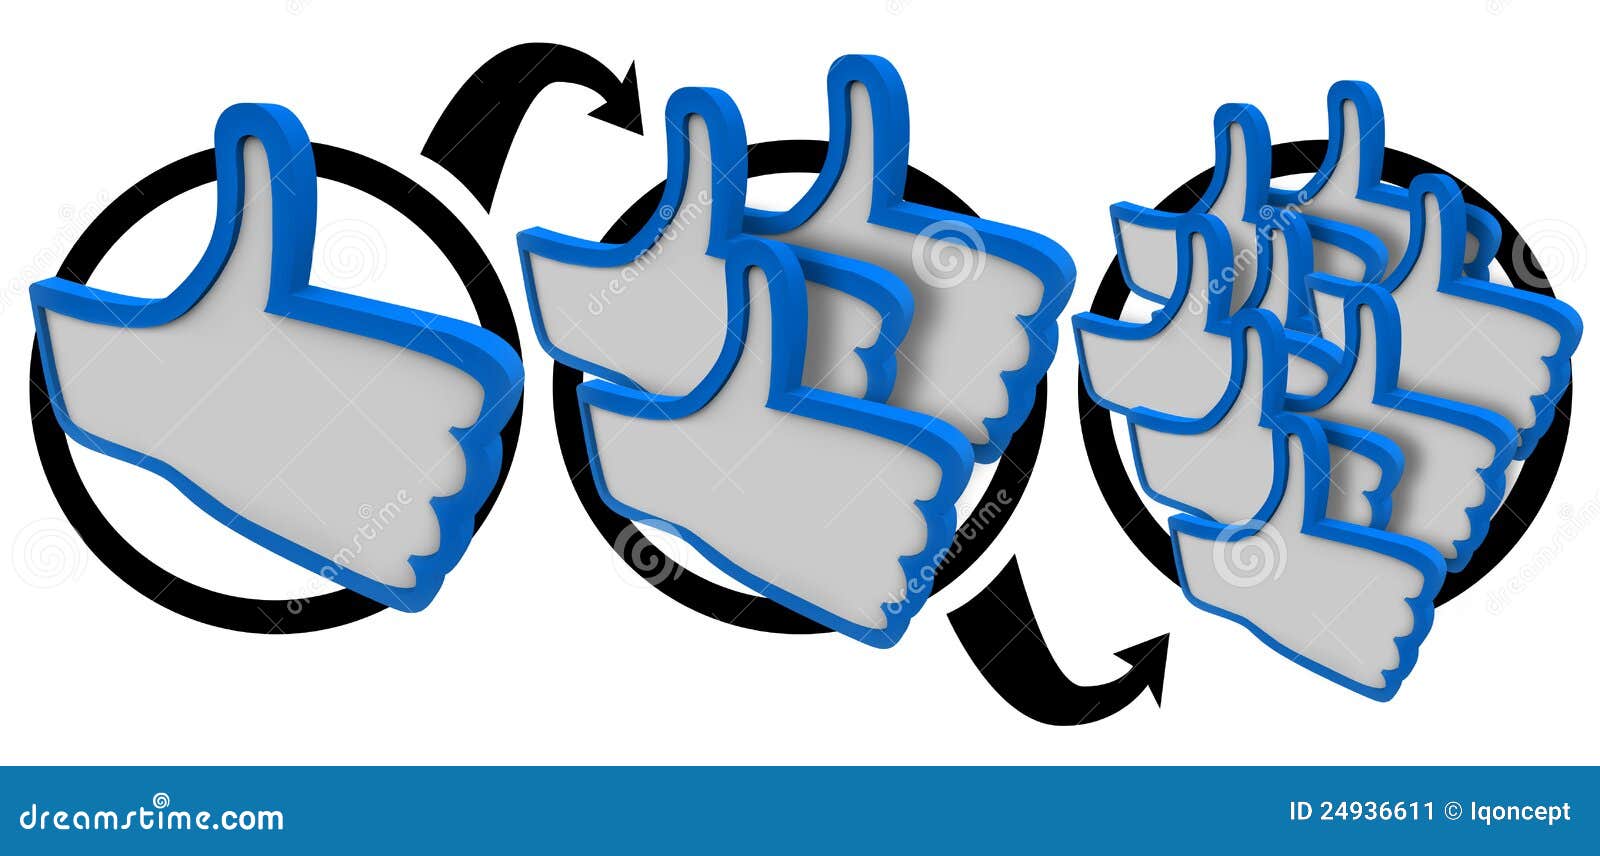 many thumbs up popularity buzz growing in steps